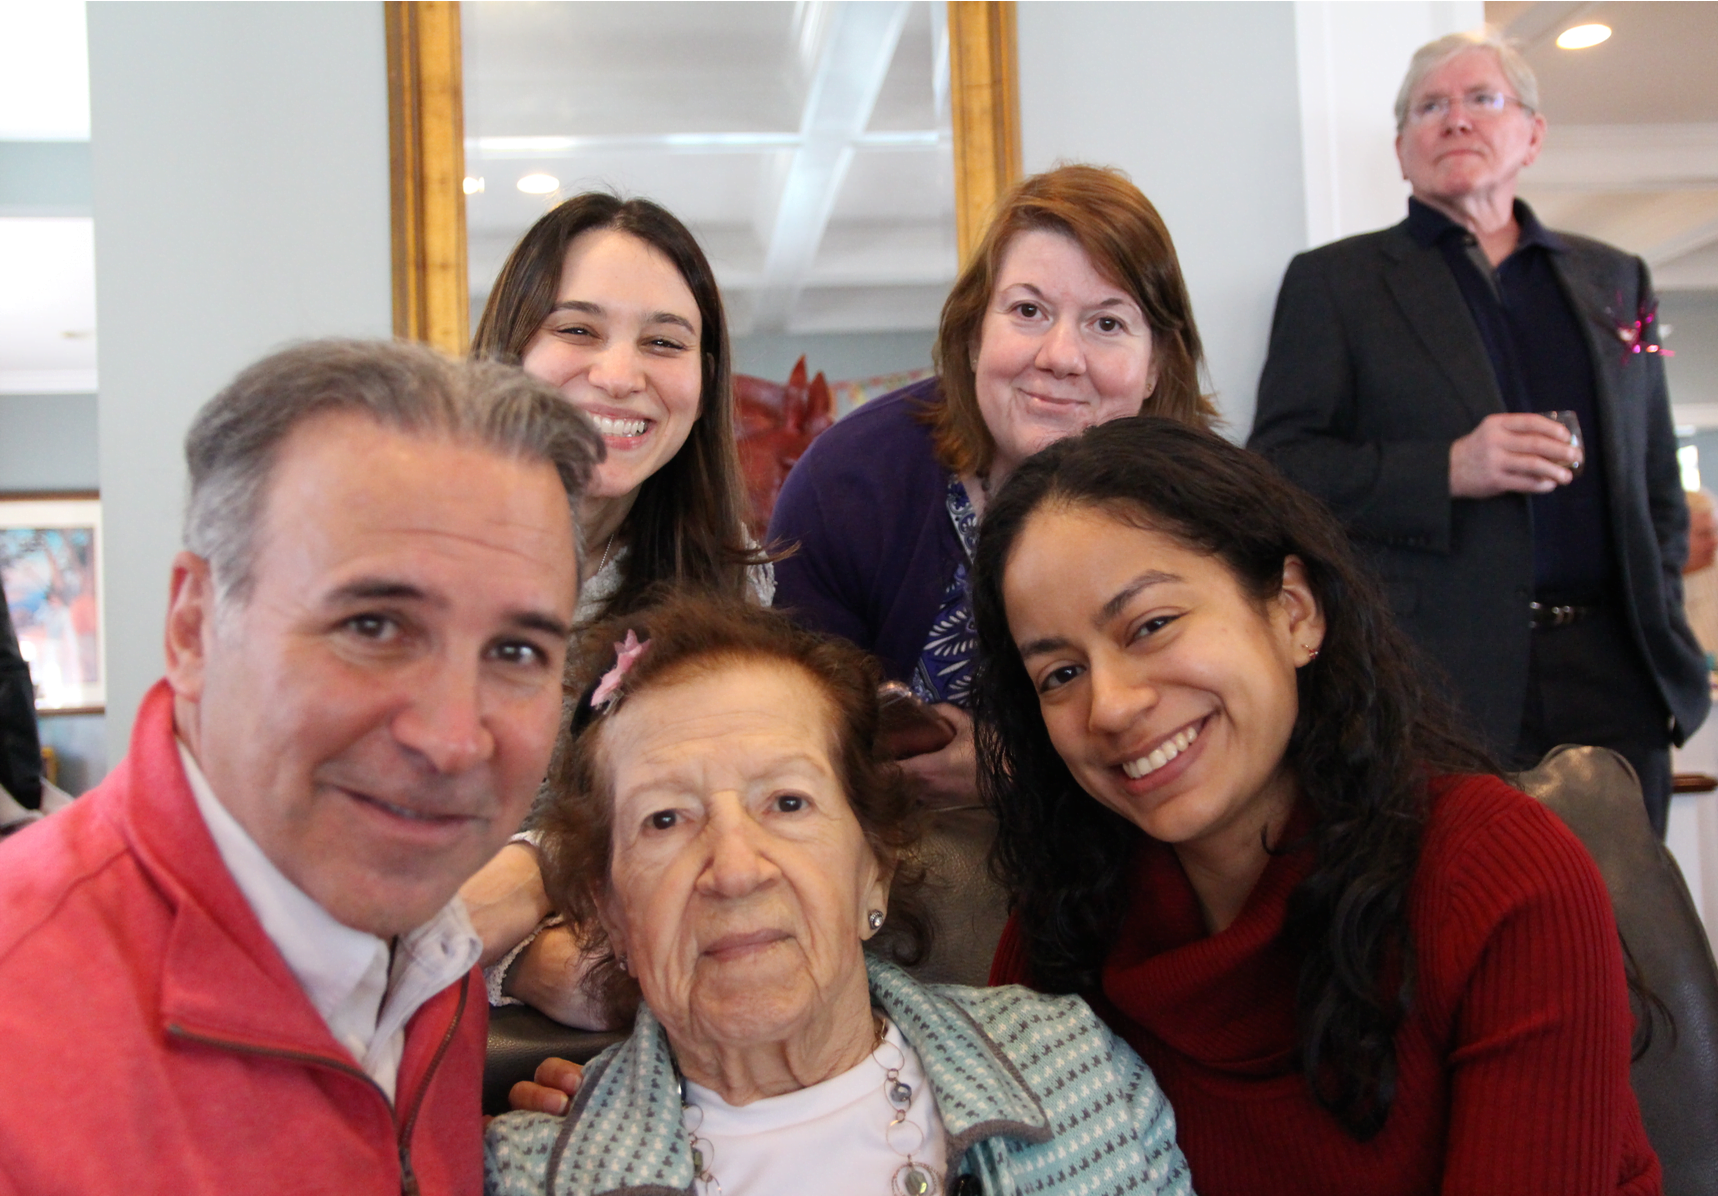 Maria Pimpinella with friends Kiki and Paola, Fred Camillo and Marion Pastore. March 11, 2018 Photo: Leslie Yager